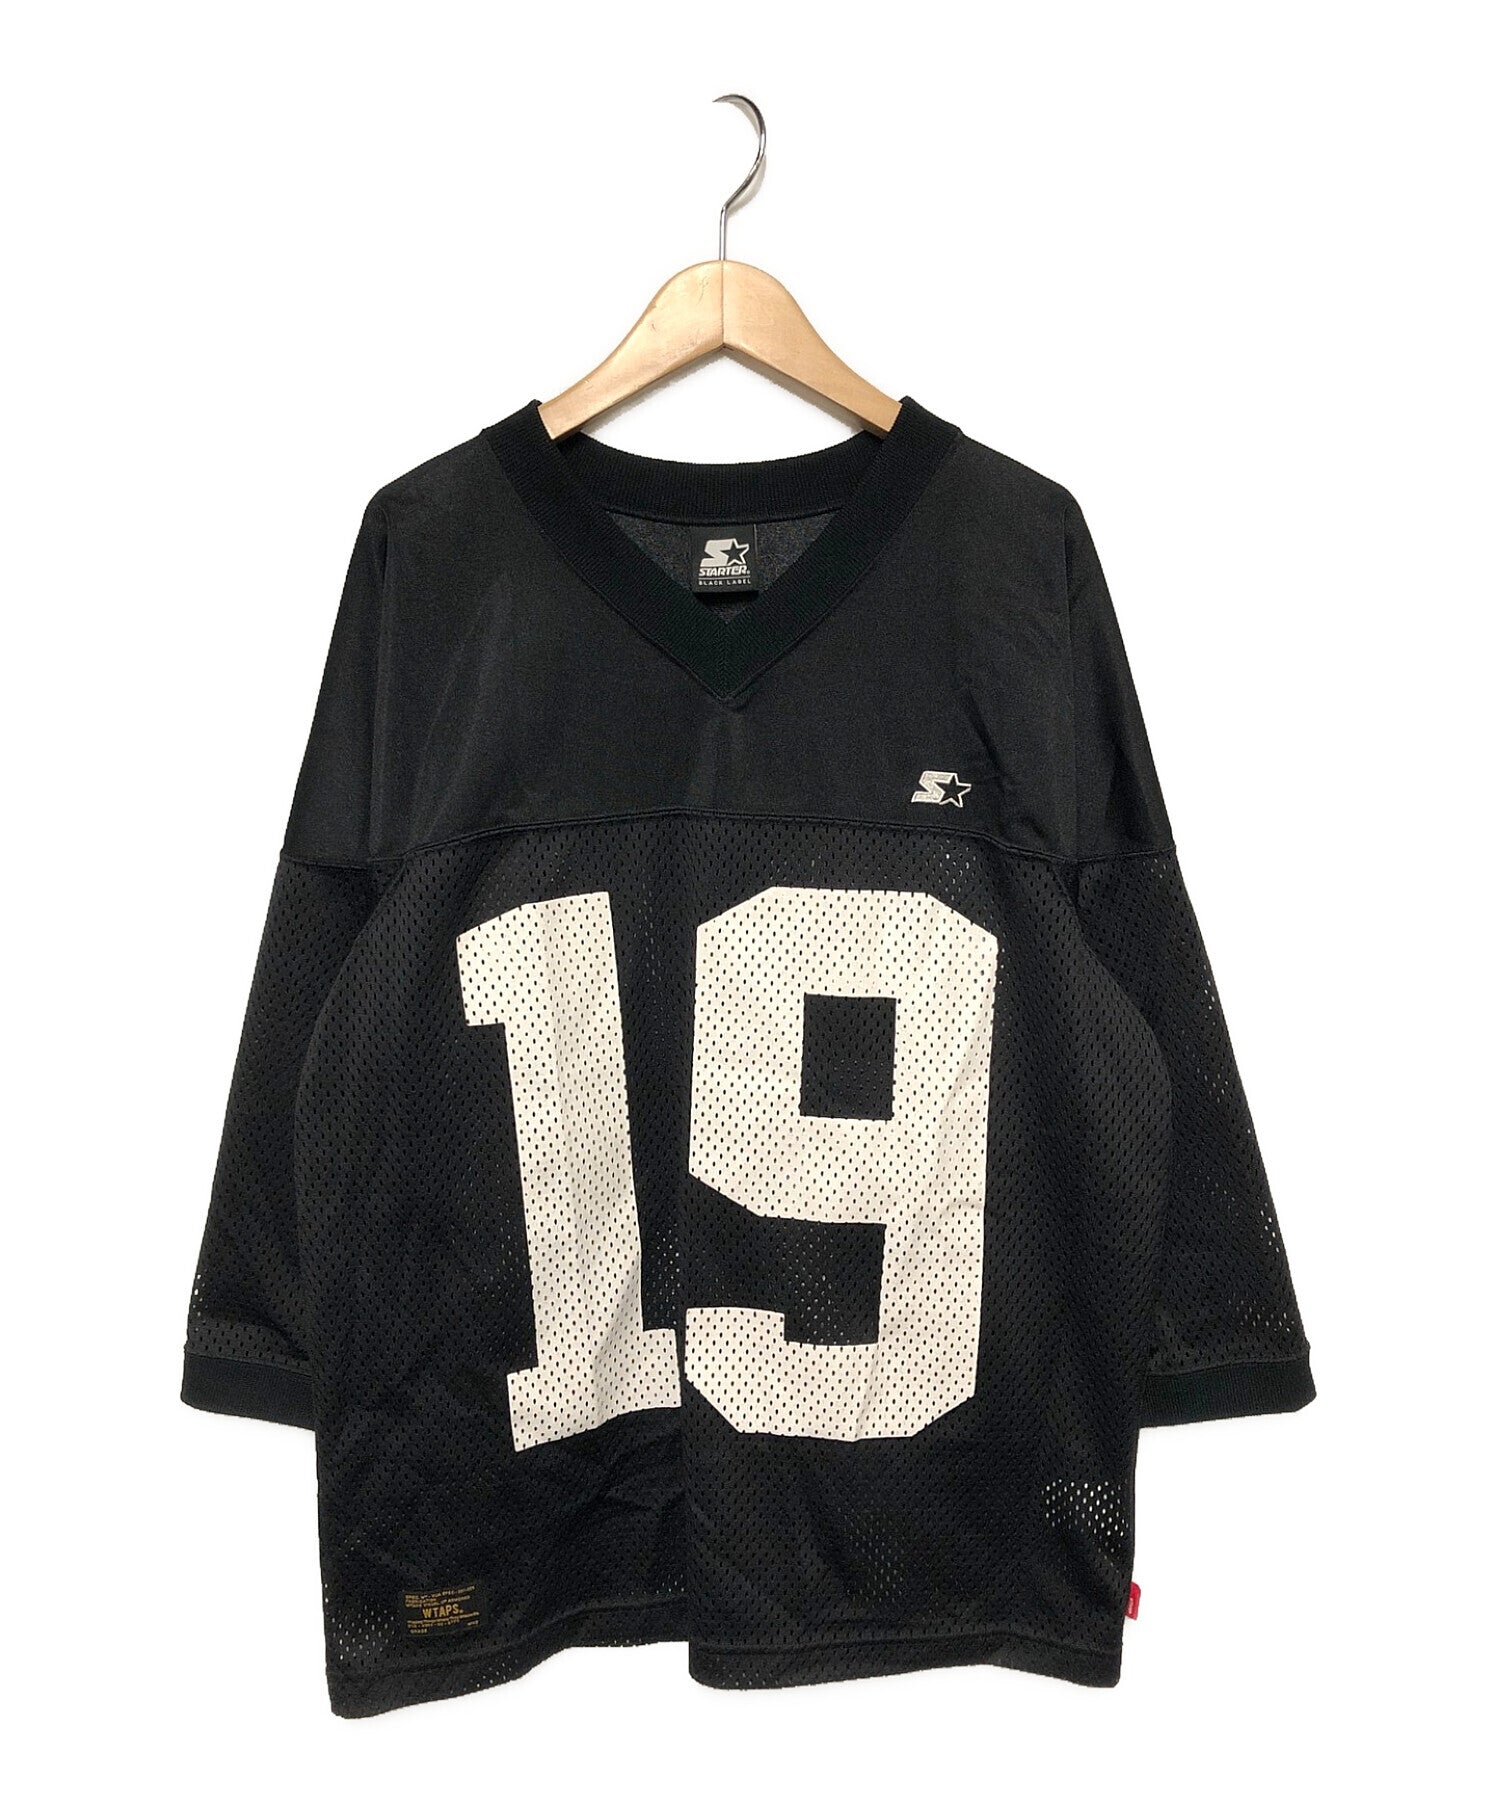 WTAPS Football T-shirts | Archive Factory